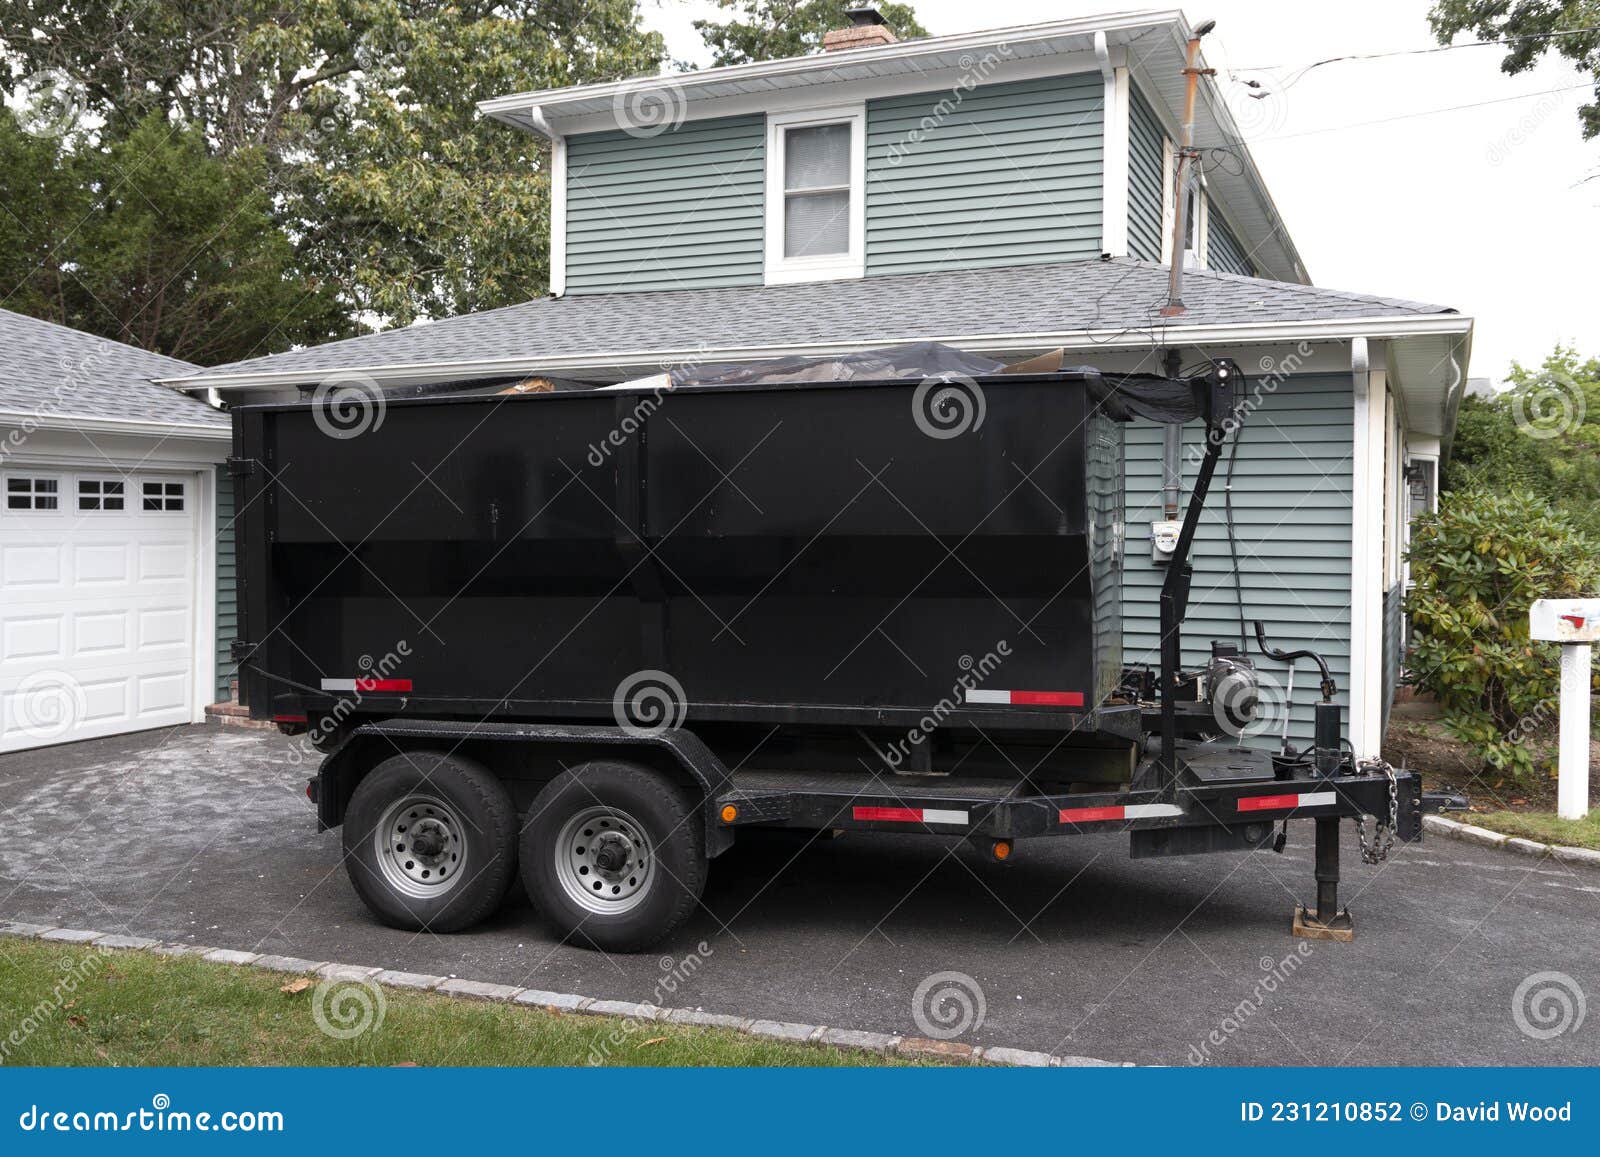 dumpster on a trailer in a residential driveway